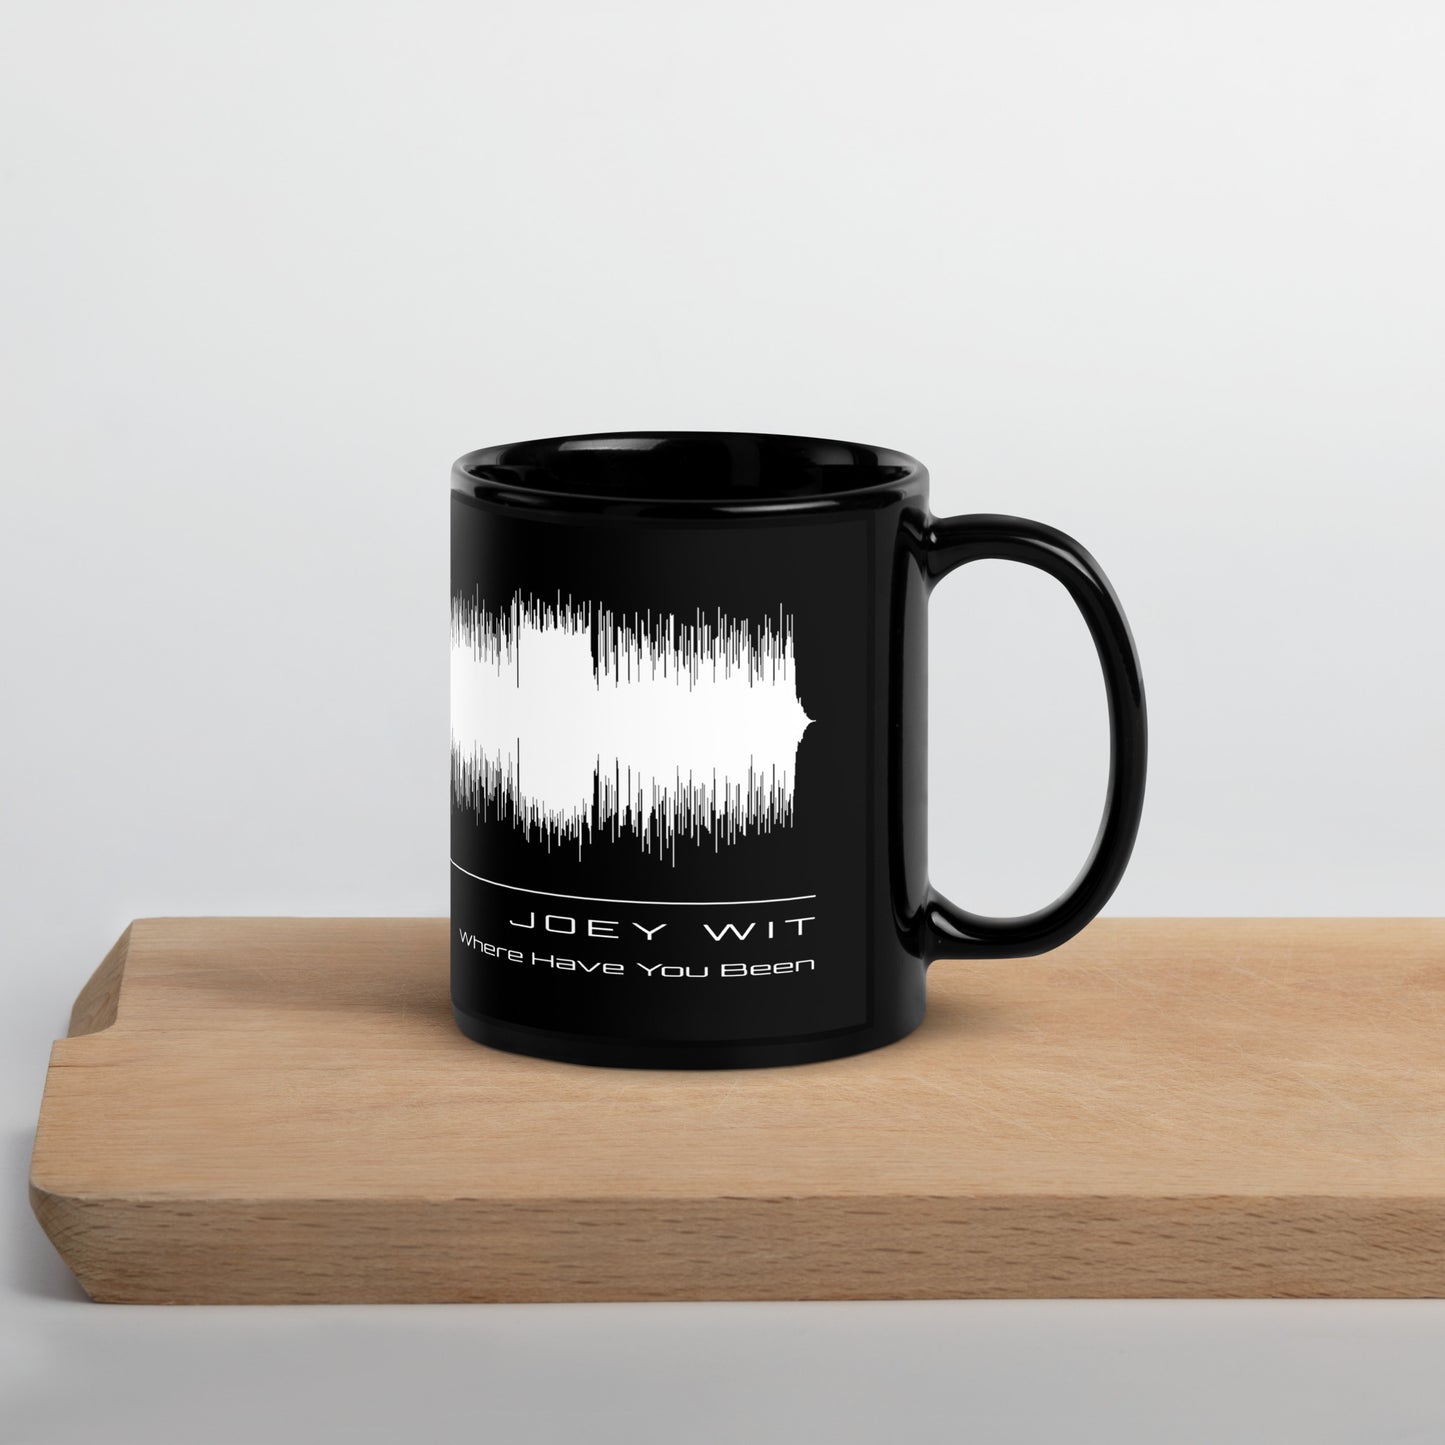 Joey Wit - Black Glossy Mug - Rose Gold #05 Where Have You Been (audio wave)